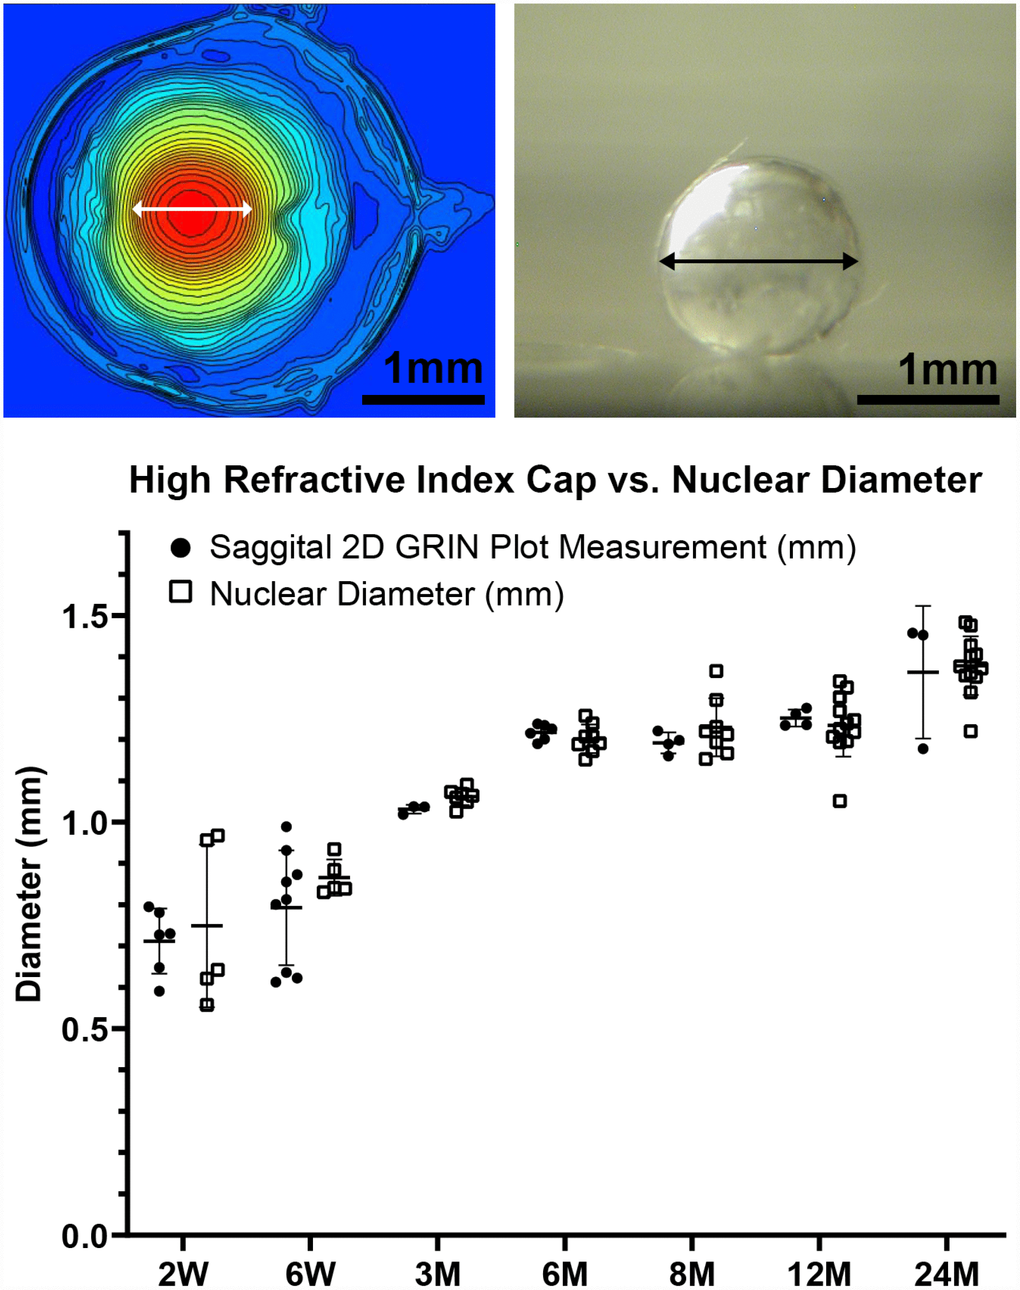 A comparison of the diameter of the cap region of high refractive index and the diameter of the extracted lens nucleus. The images show a representative mid-sagittal 2D contour plot and a representative lens nucleus with double-headed arrows indicating measured diameters. The graph compares the cap diameter in the sagittal 2D GRIN plot to the diameter of the lens nucleus. Lines on the plots reflect mean ± SD of n = at least 3 lenses from different mice per age. There was no statistically significant difference between the cap and nucleus diameters indicating that the area of high refractive index is directly correlated with the hard and compact lens nucleus. Scale bars, 1mm.